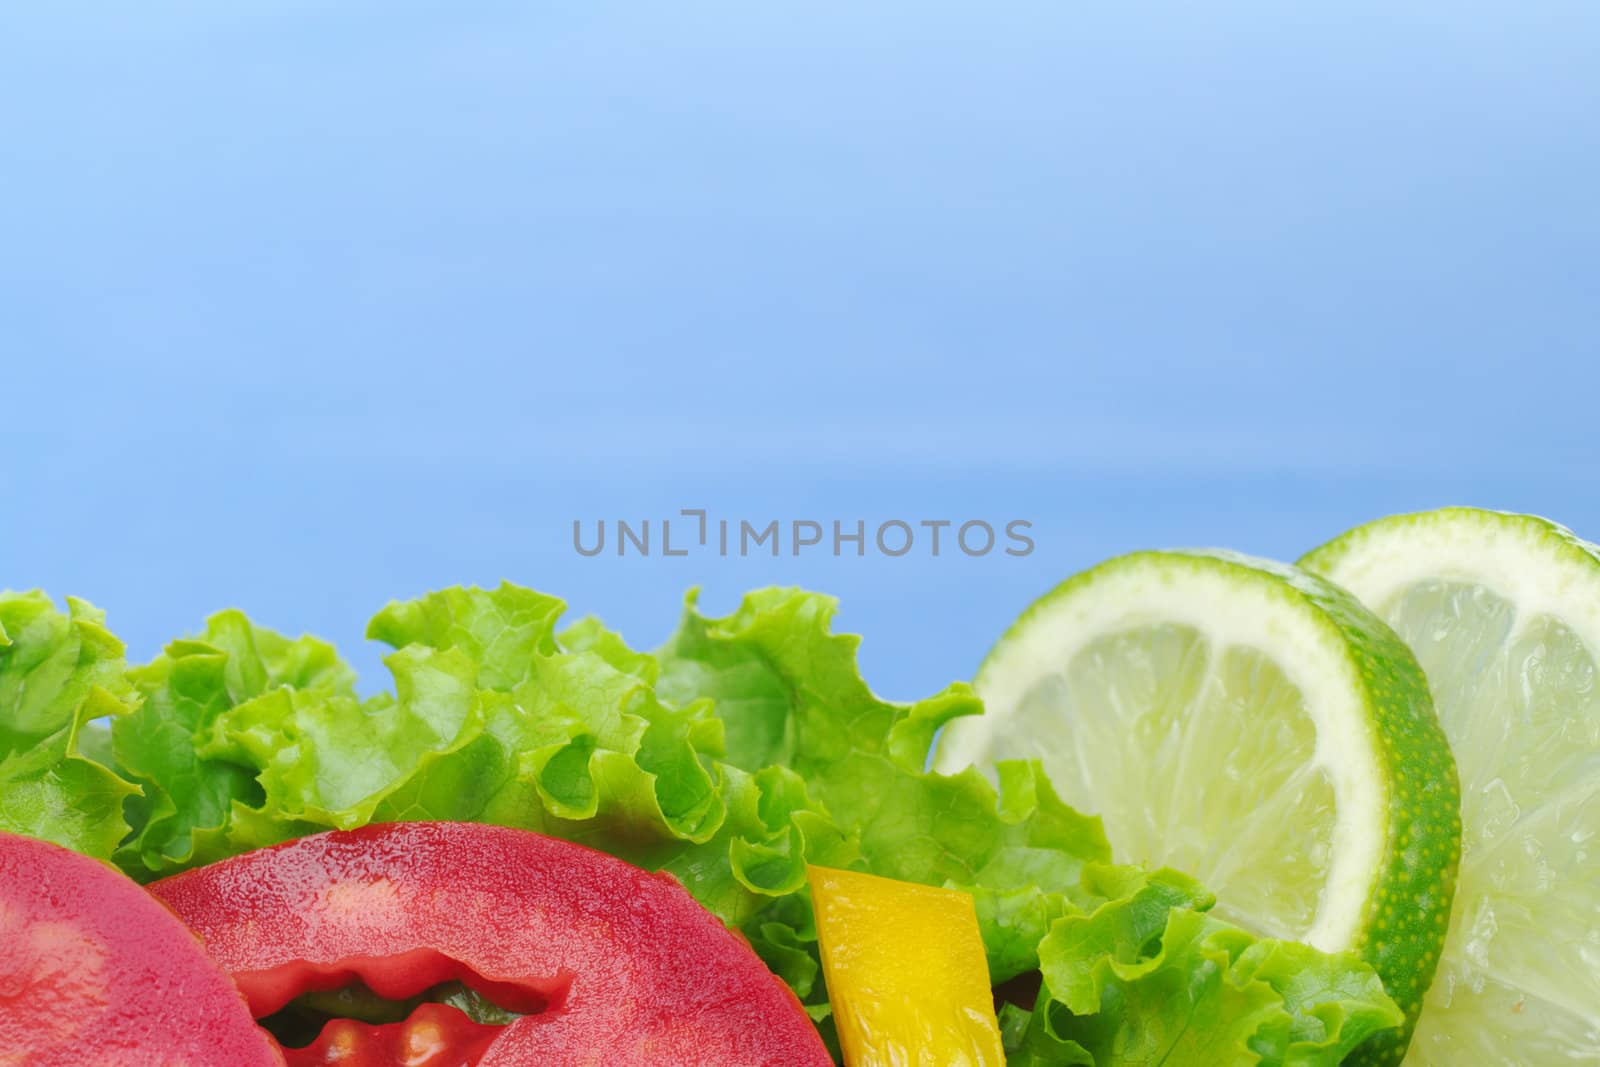 Lettuce, tomato slices, yellow bell pepper and lime slices on blue background (Selective Focus) 